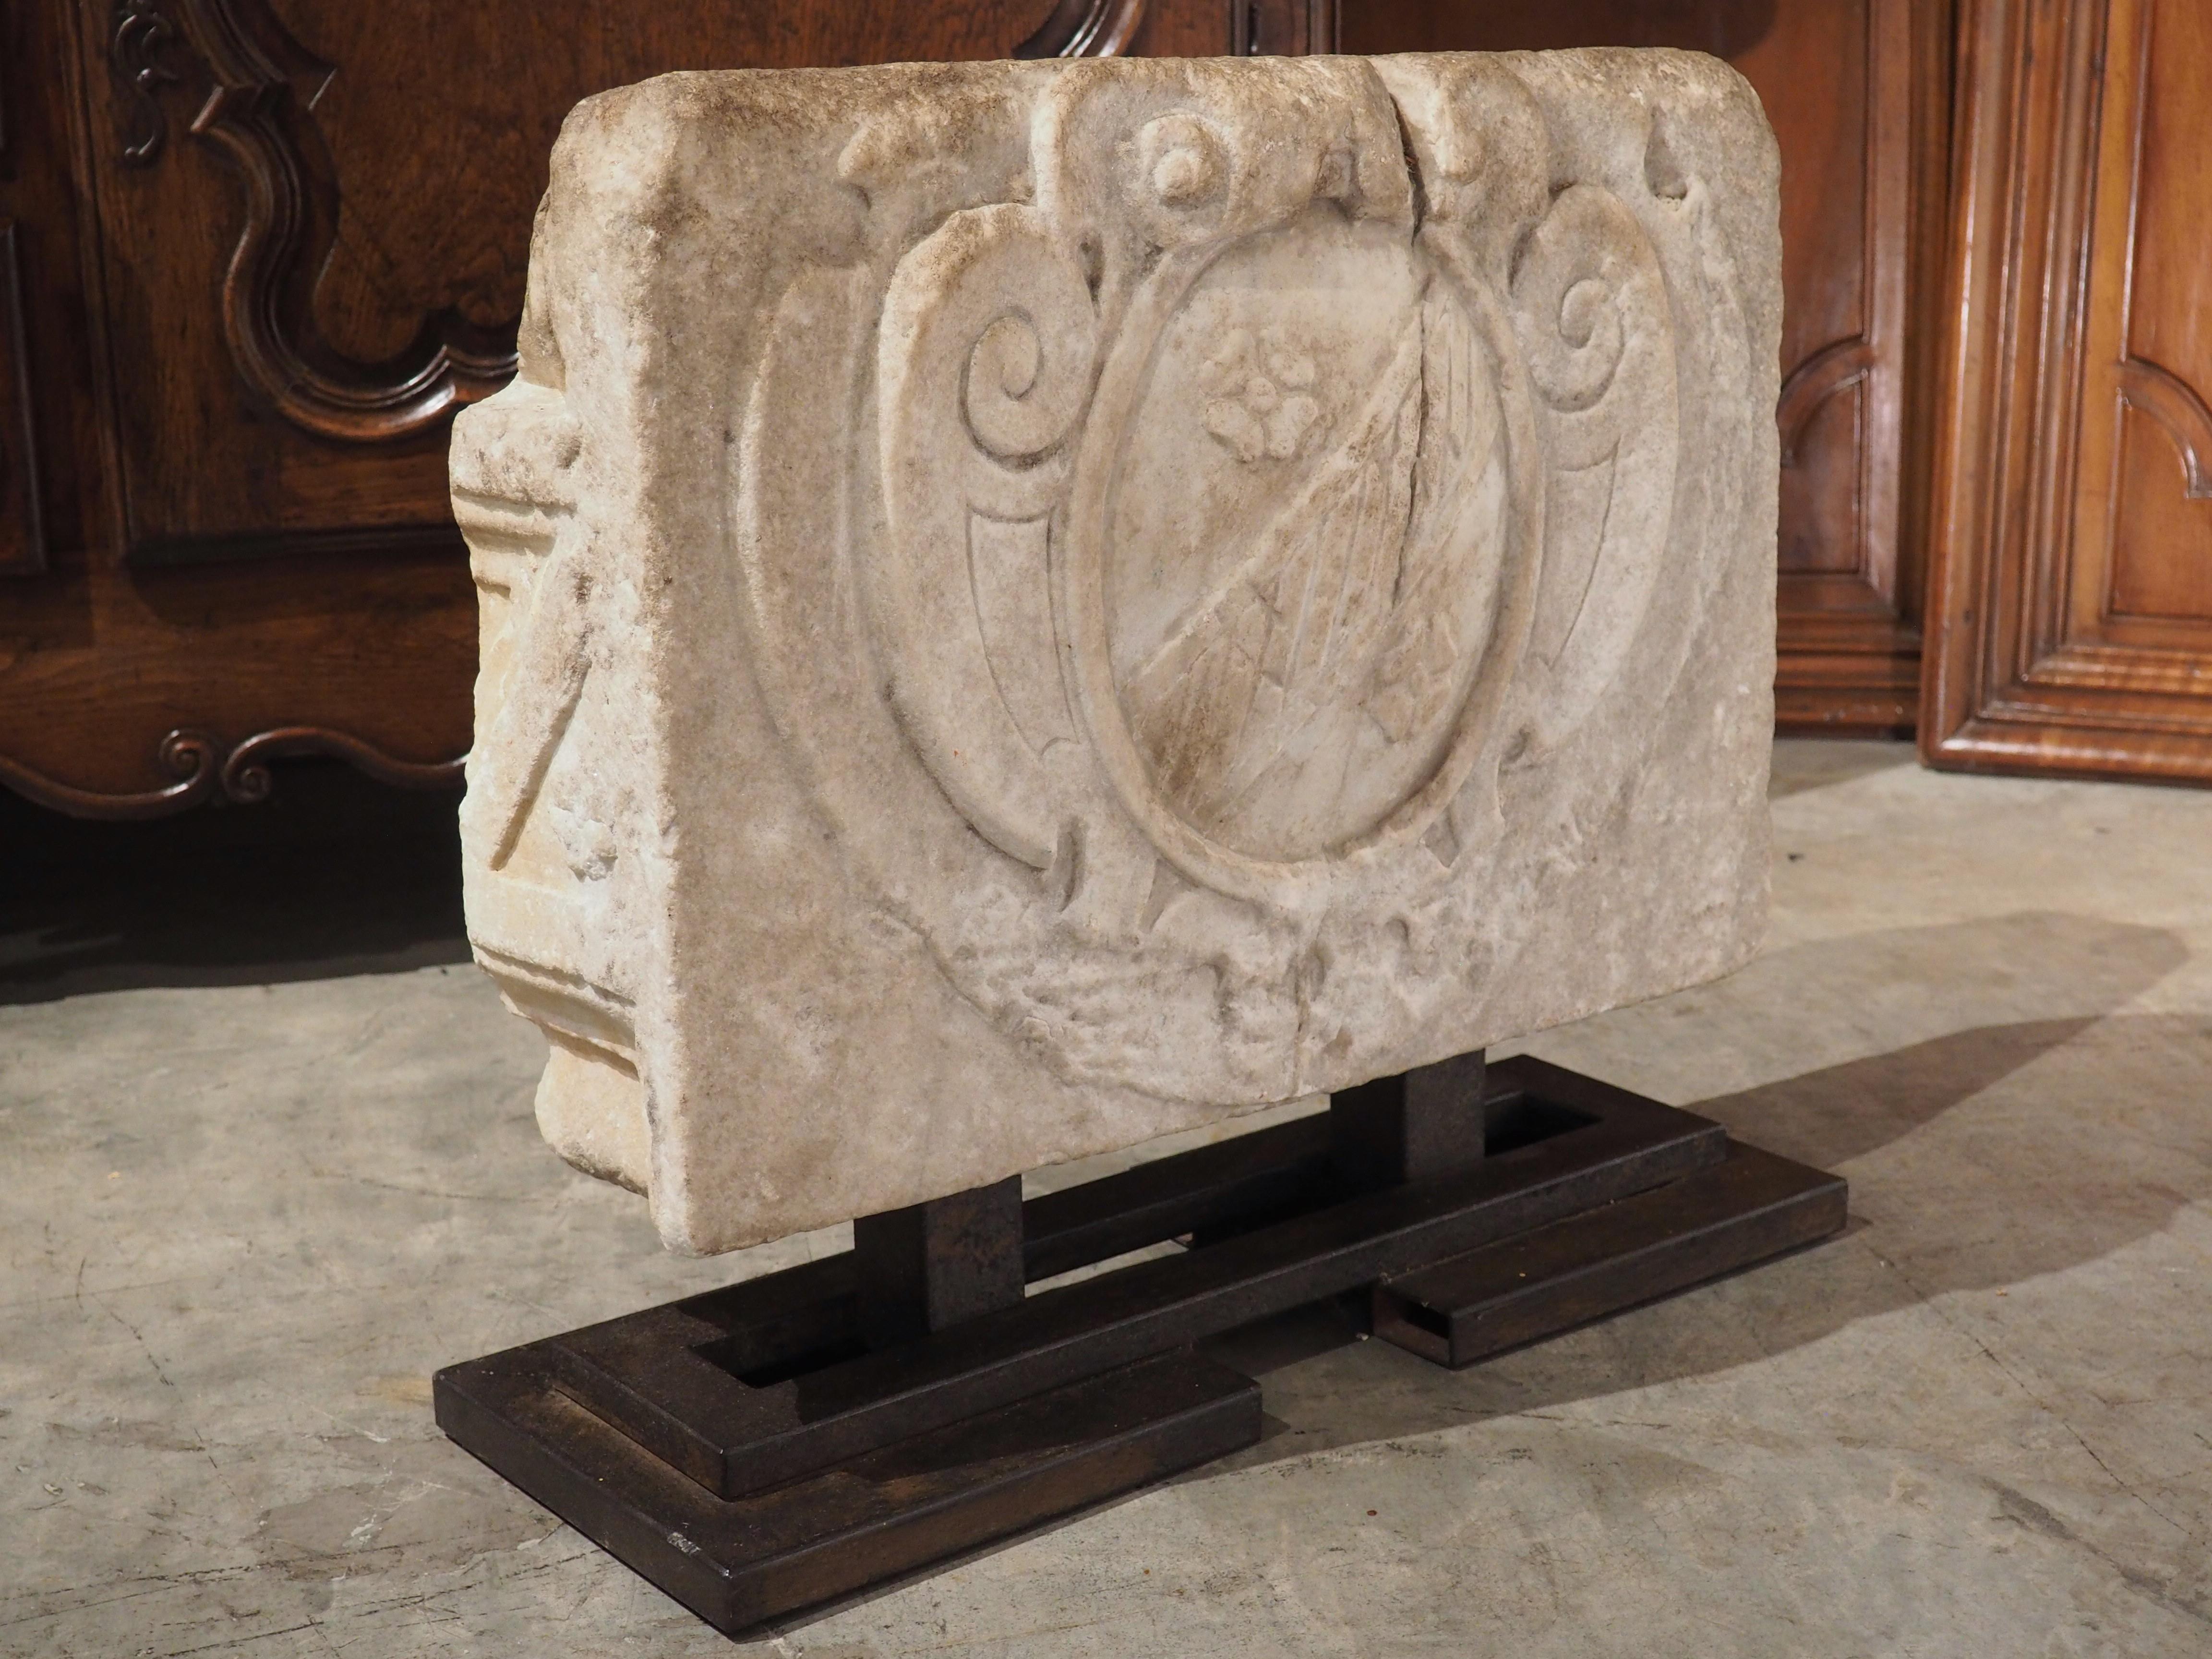 The carvings of this marble stemma cartouche dates to the 1500’s. Hand-carved in Tuscany, Italy, the marble was mounted onto a geometrically shaped iron stand within the last century.

Stemmas can be traced back to ancient Rome when genealogical